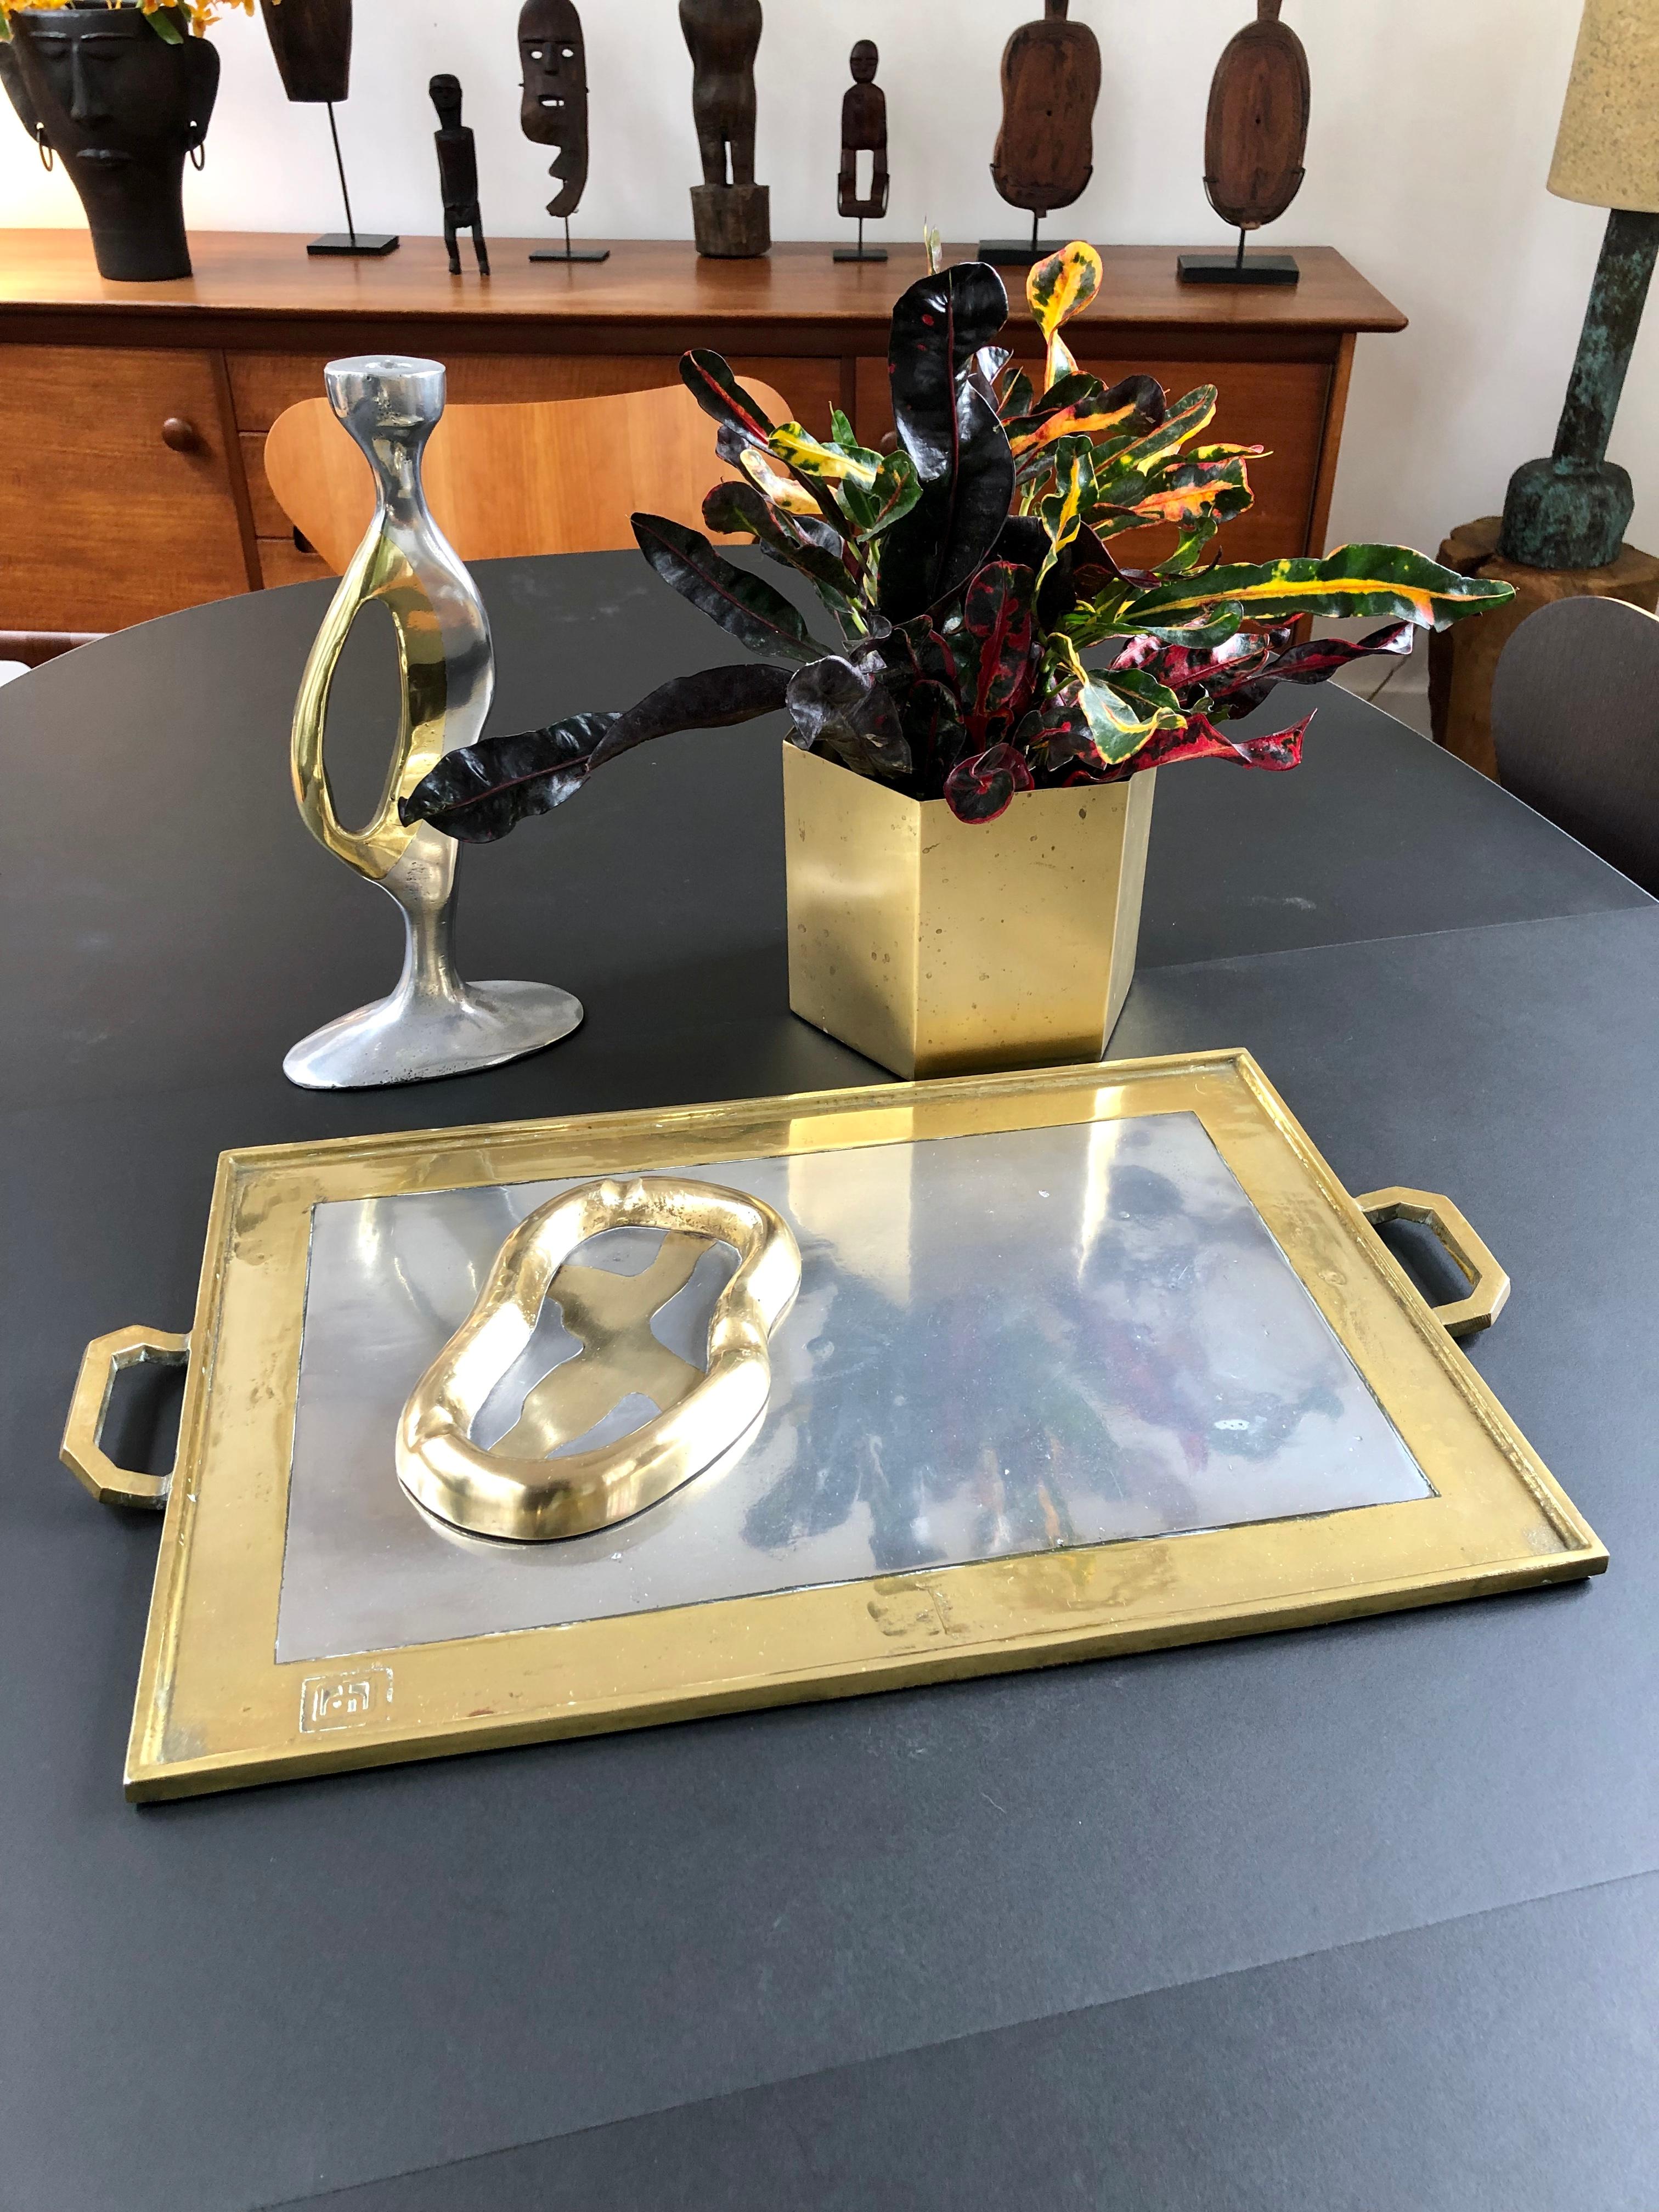 This aluminium and brass Brutalist style serving tray (circa 1970s) by David Marshall is weighty and wonderfully tactile with the maker's mark impressed on the brass surface. There are handles on the far ends of the brass which frames the shiny